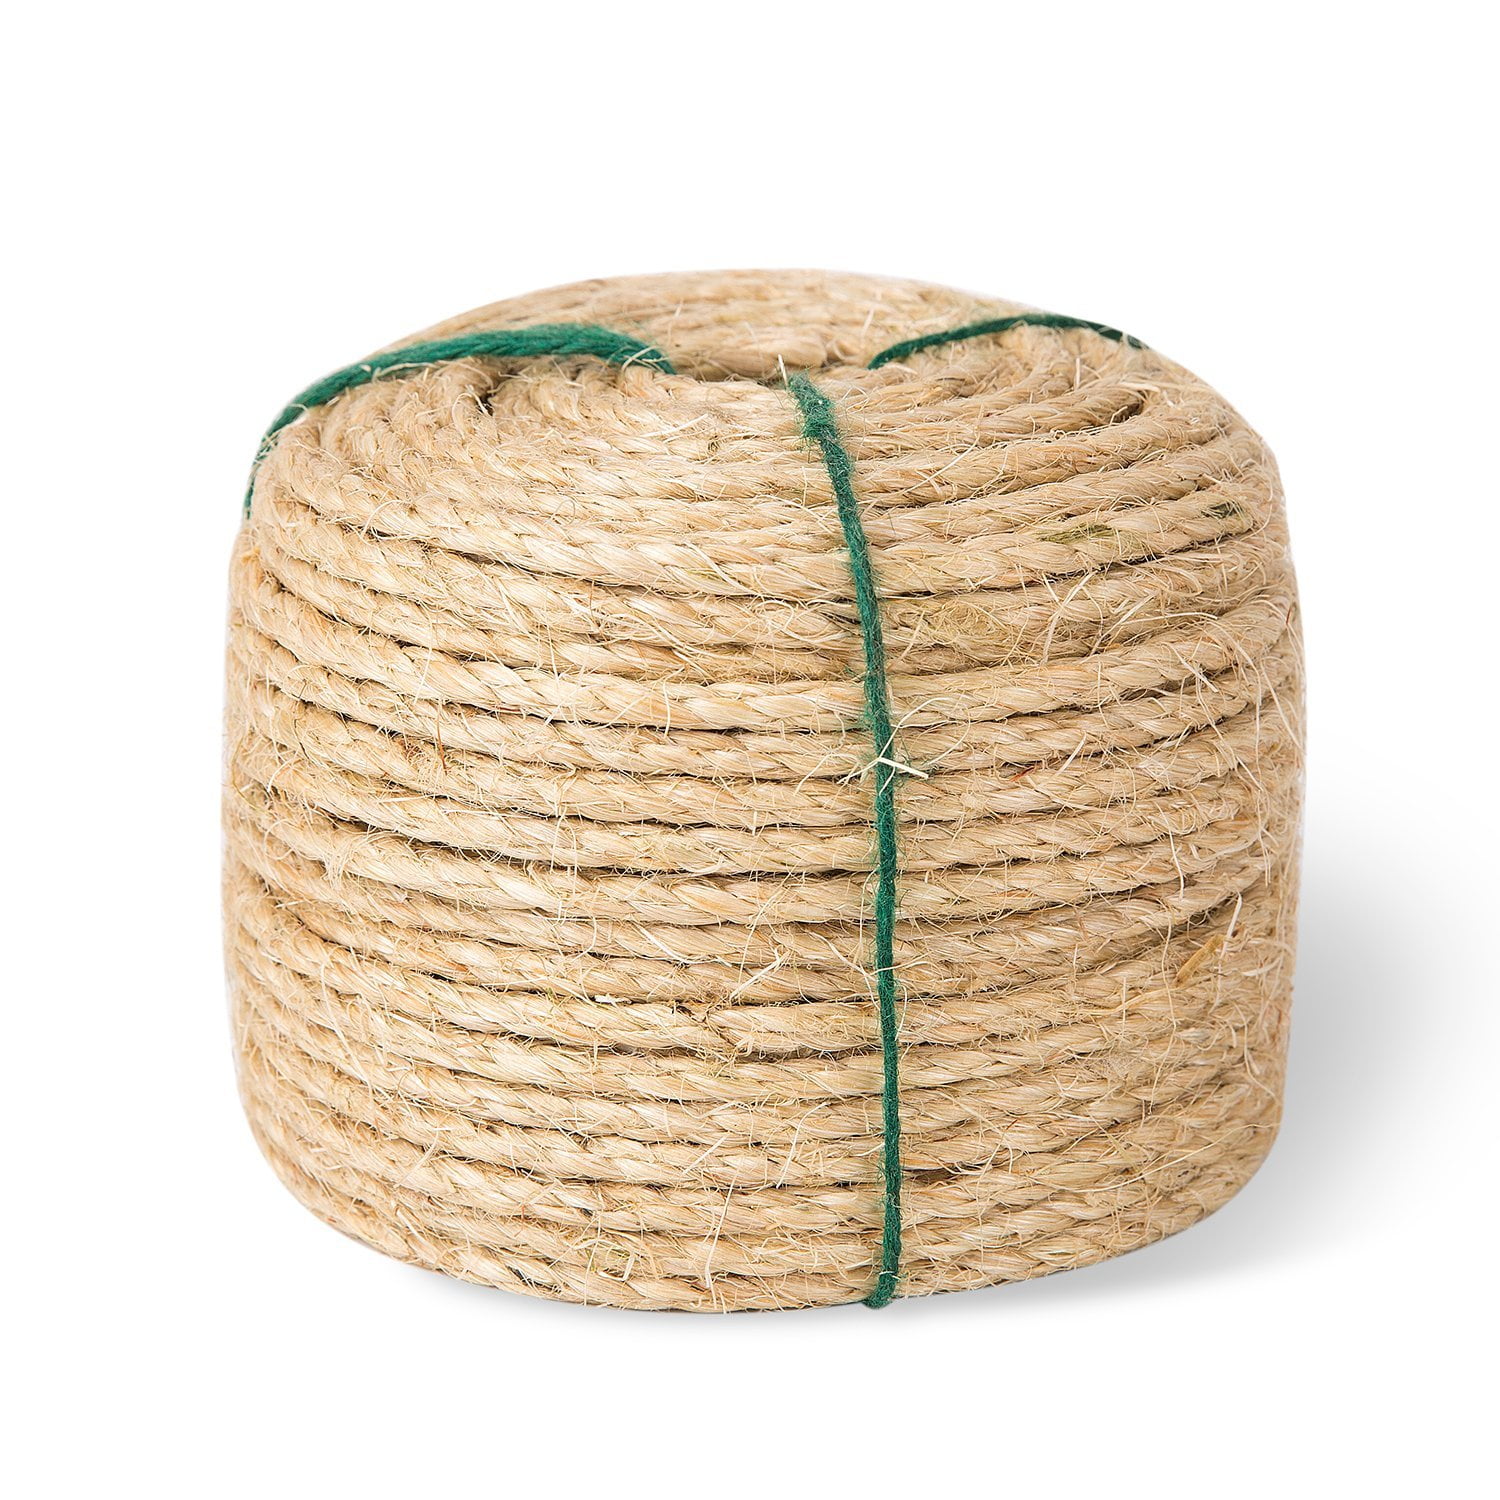 100 Feet / 50 Feet Hemp Rope for Repairing Natural Sisal White Rope for Cat Scratching Post Replacement 1/4 Inch Diameter Recovering or DIY Cat Scratcher